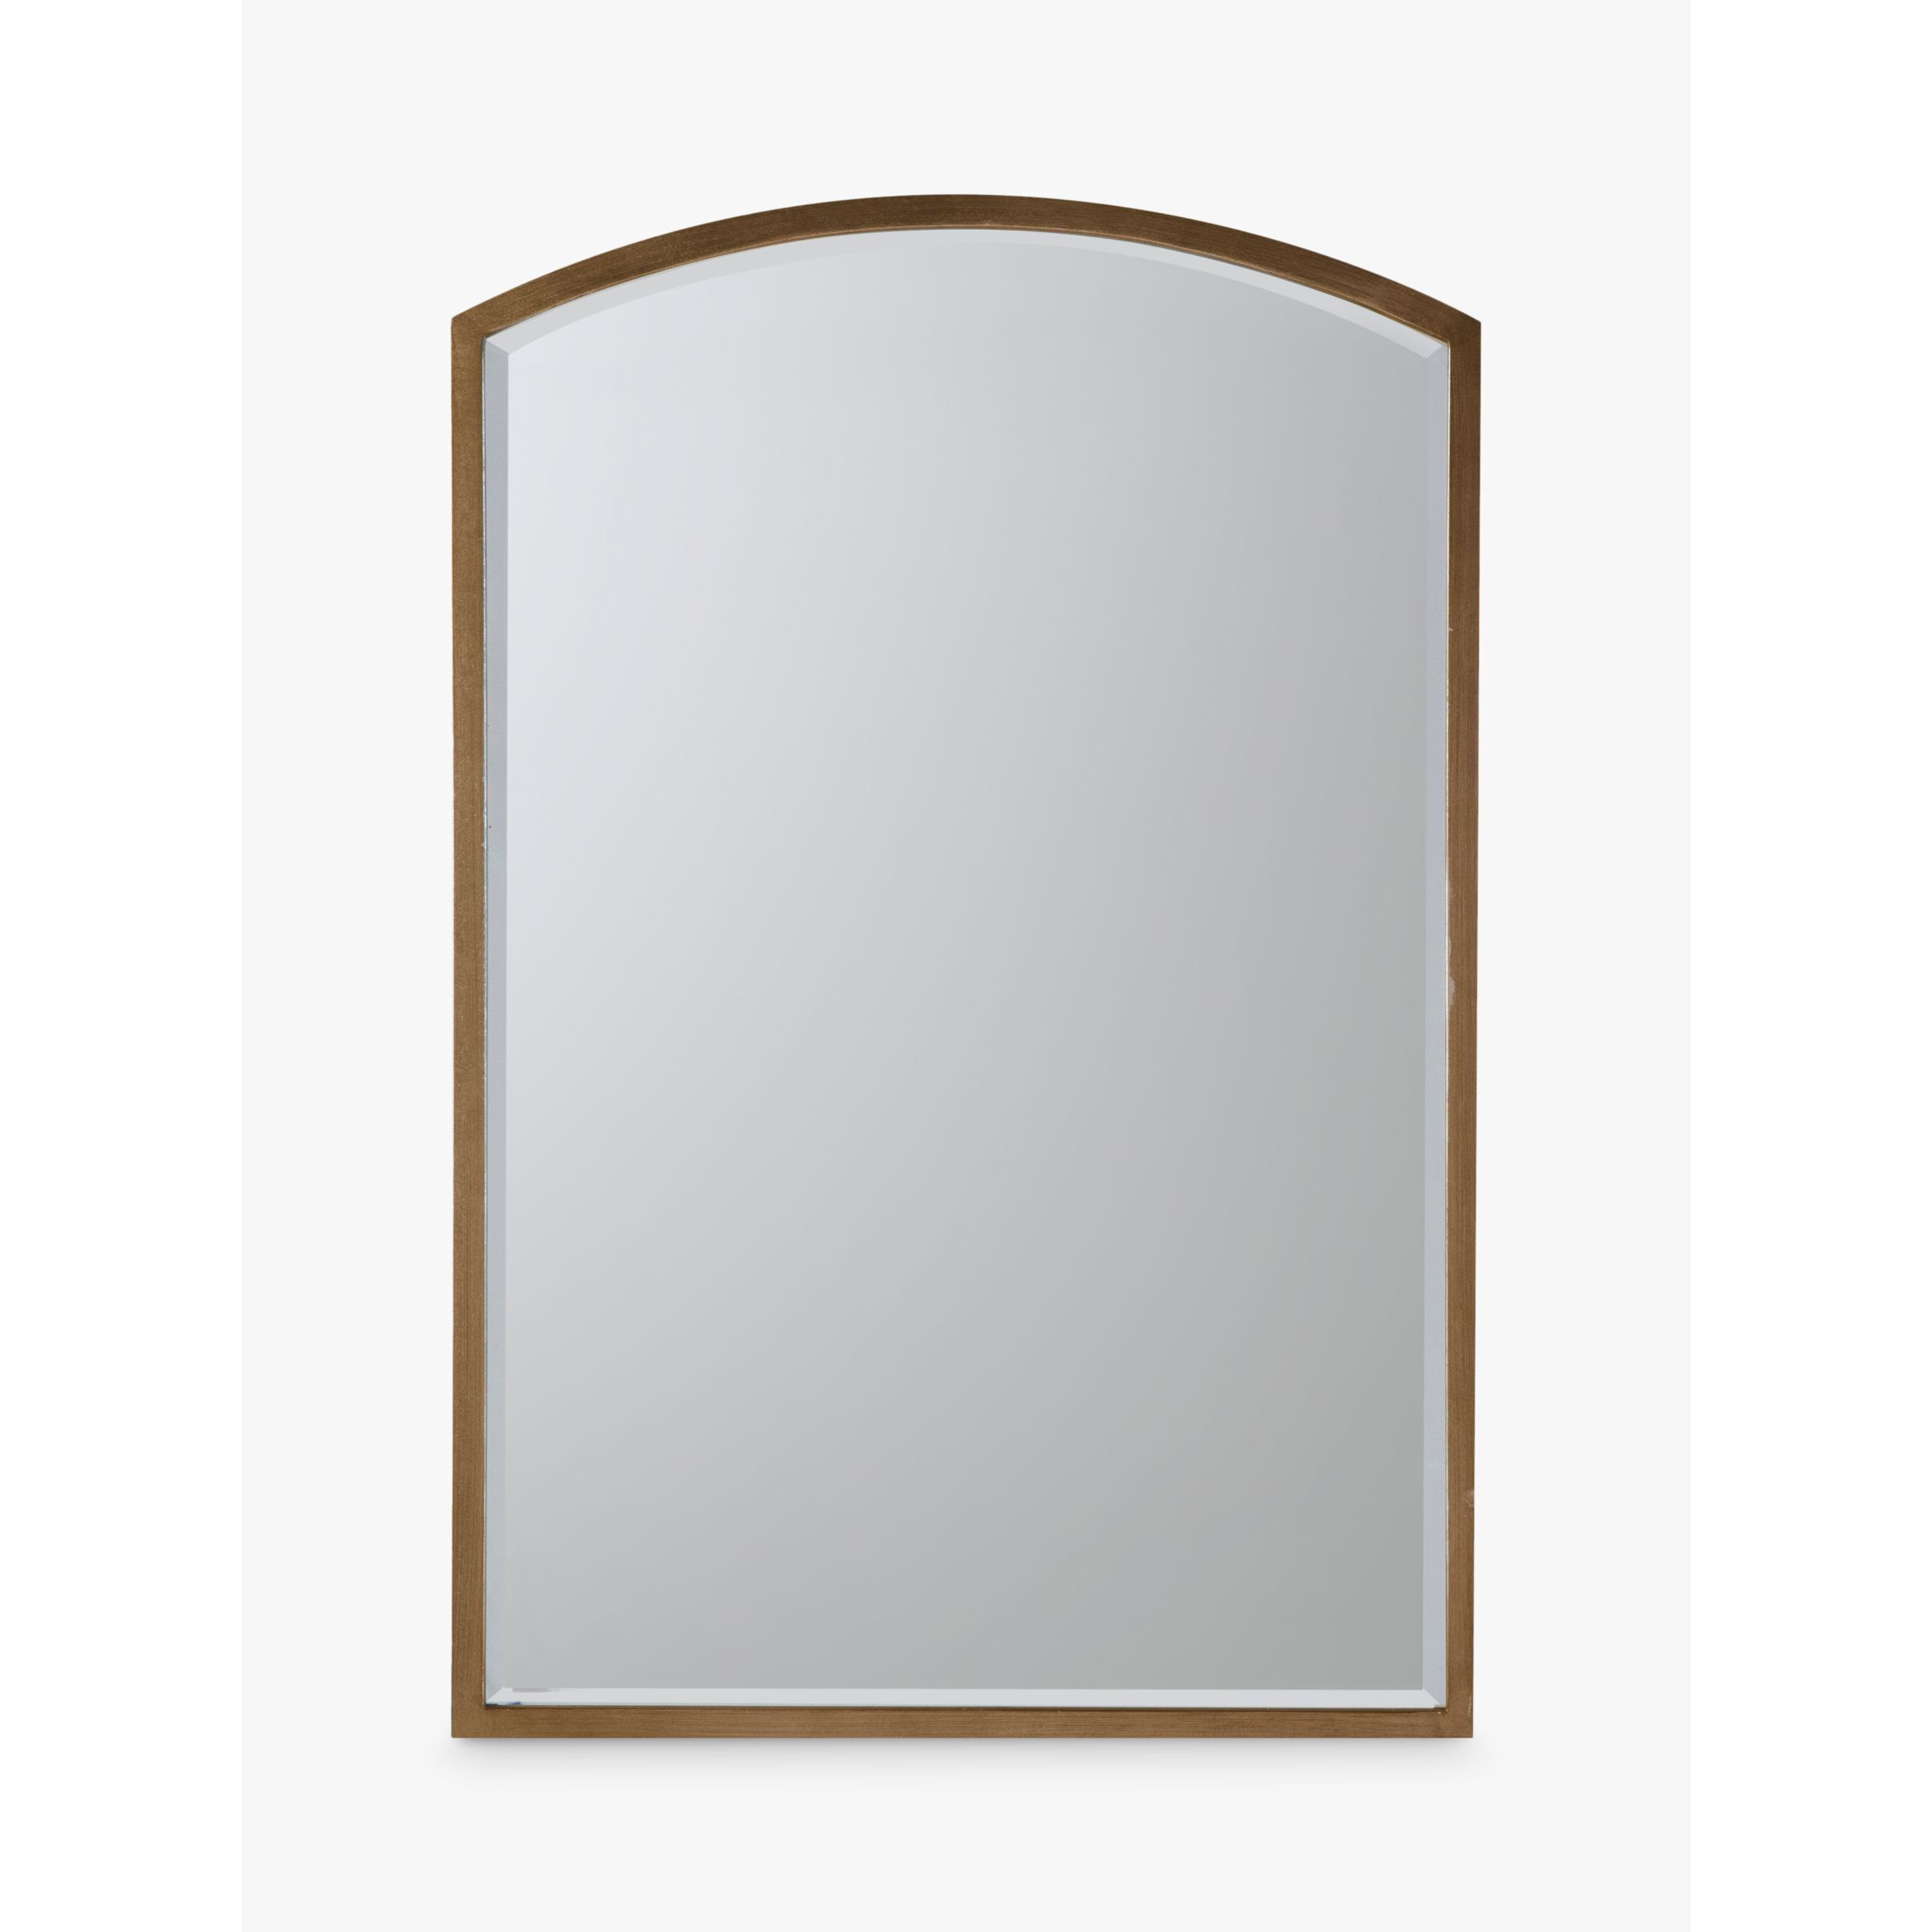 Gallery Direct Cade Arched Wall Mirror - image 1